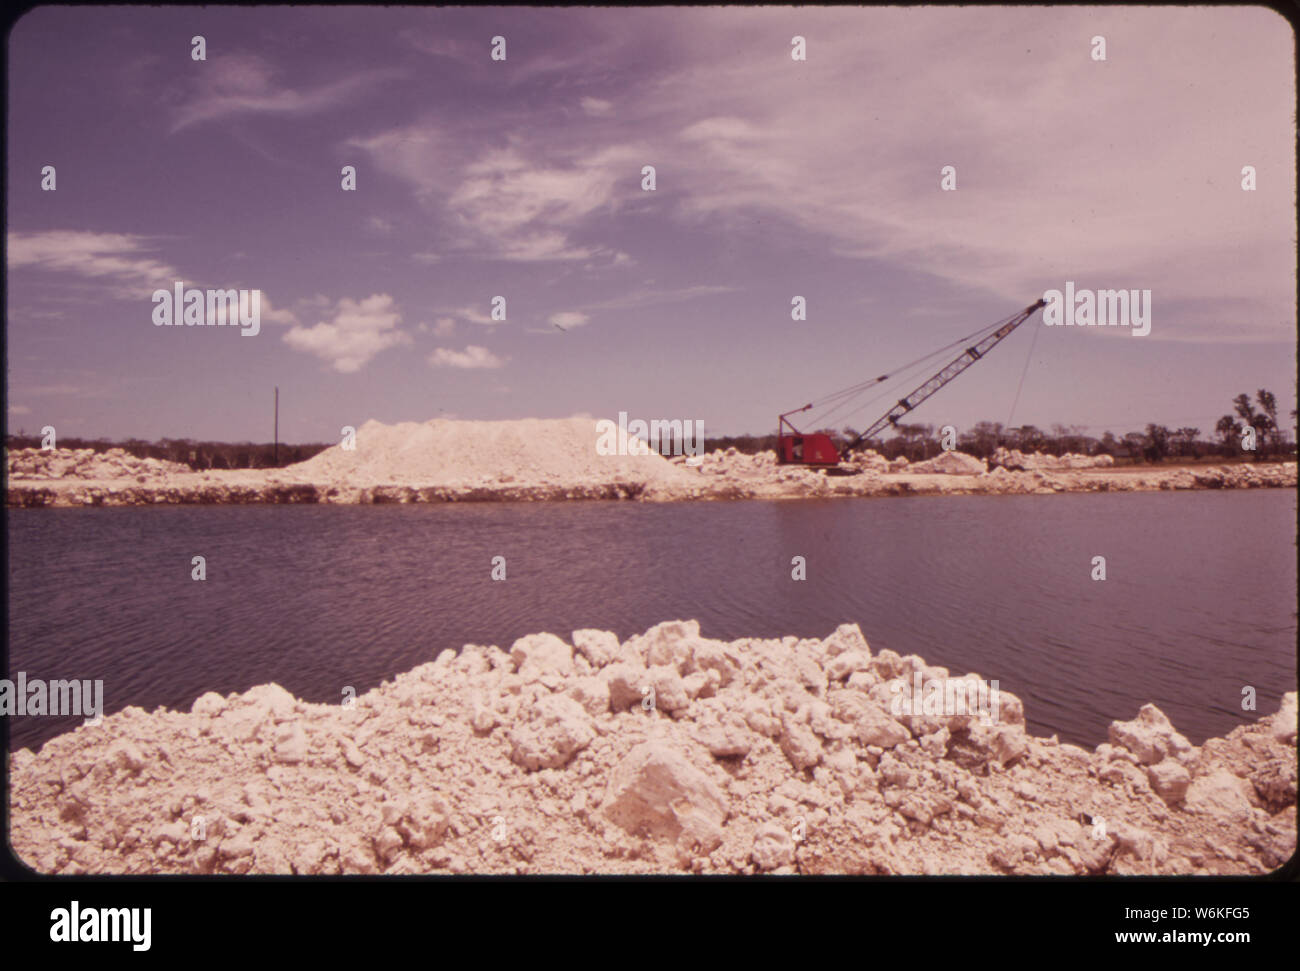 SCENE ACROSS A CHANNEL DUG BY A DRAGLINE AT NORTH KEY LARGO. THIS PROCEDURE IS REGULATED BY THE STATE GOVERNMENT, BUT MANY ABUSES HAVE BEEN DOCUMENTED BY THE MIAMI PRESS Stock Photo